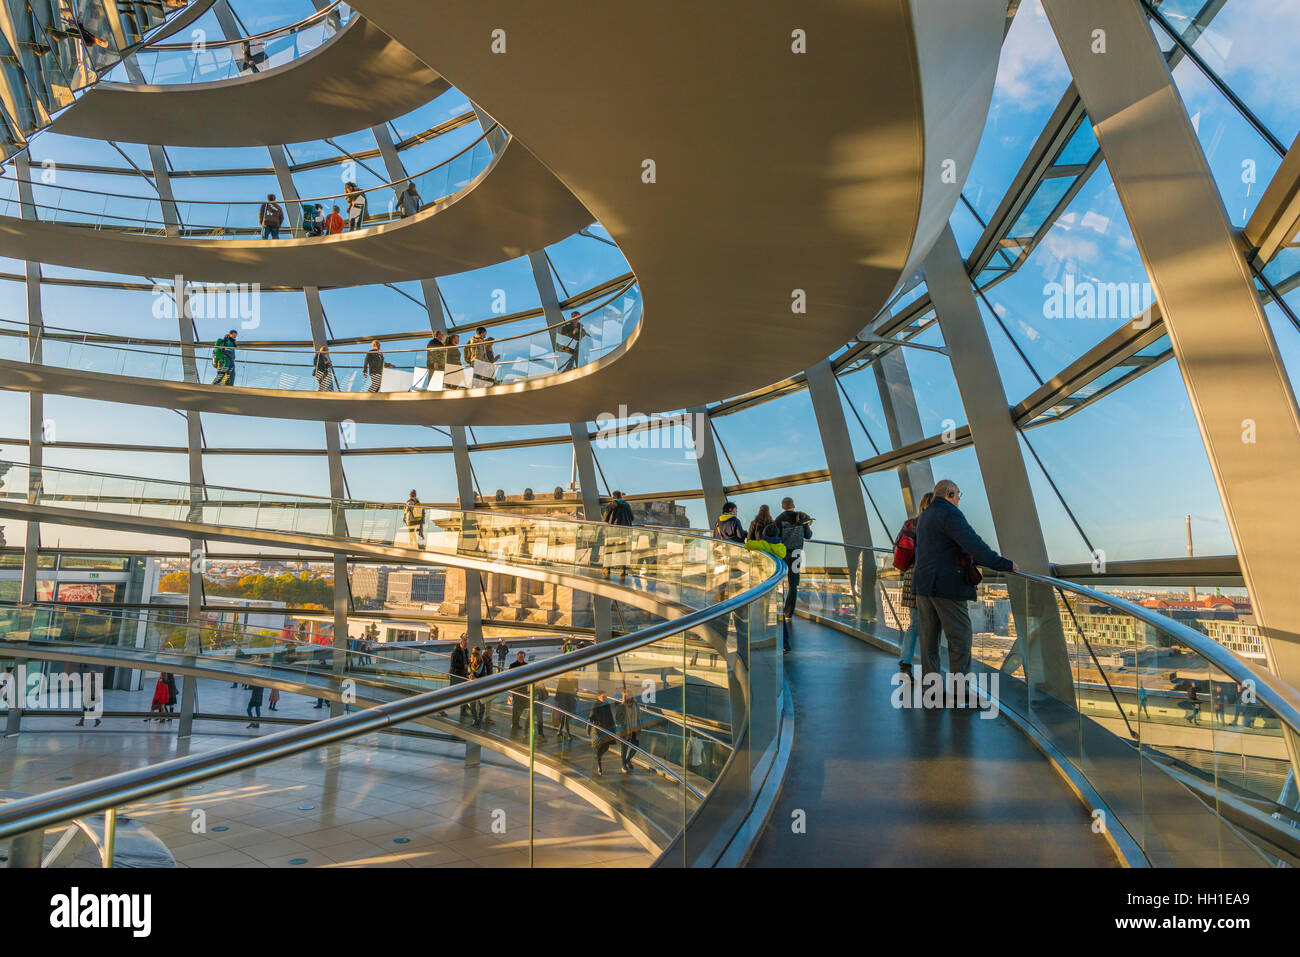 Interior of Reichstag dome with visitors, Reichstag building, Bundestag, Berlin, Germany Stock Photo